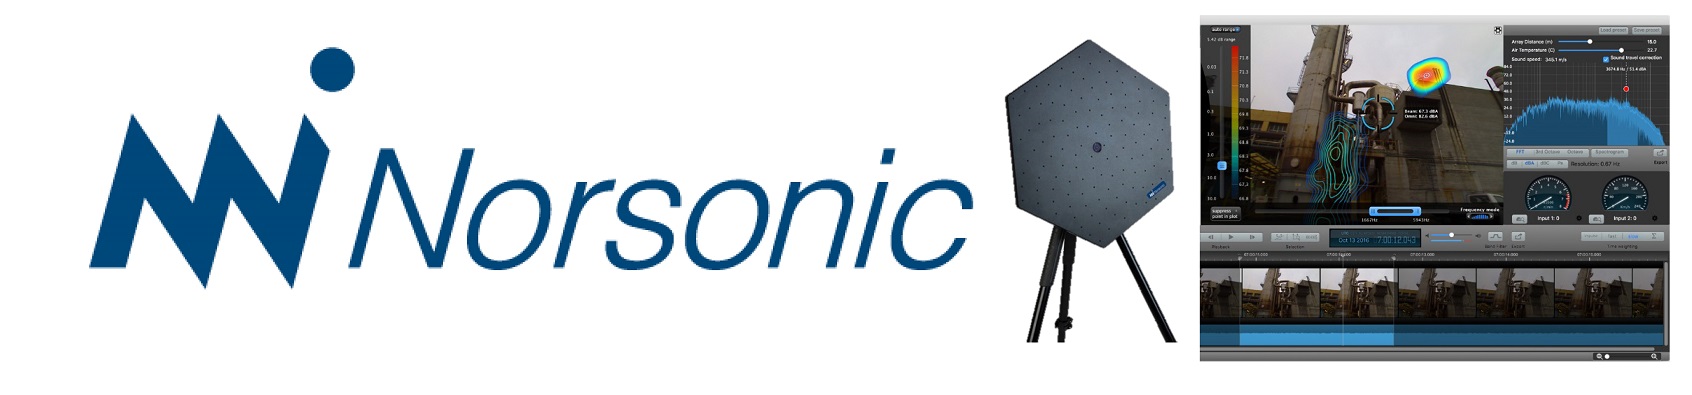 Products - Noise Source Identification - Norsonic Acoustic Camera